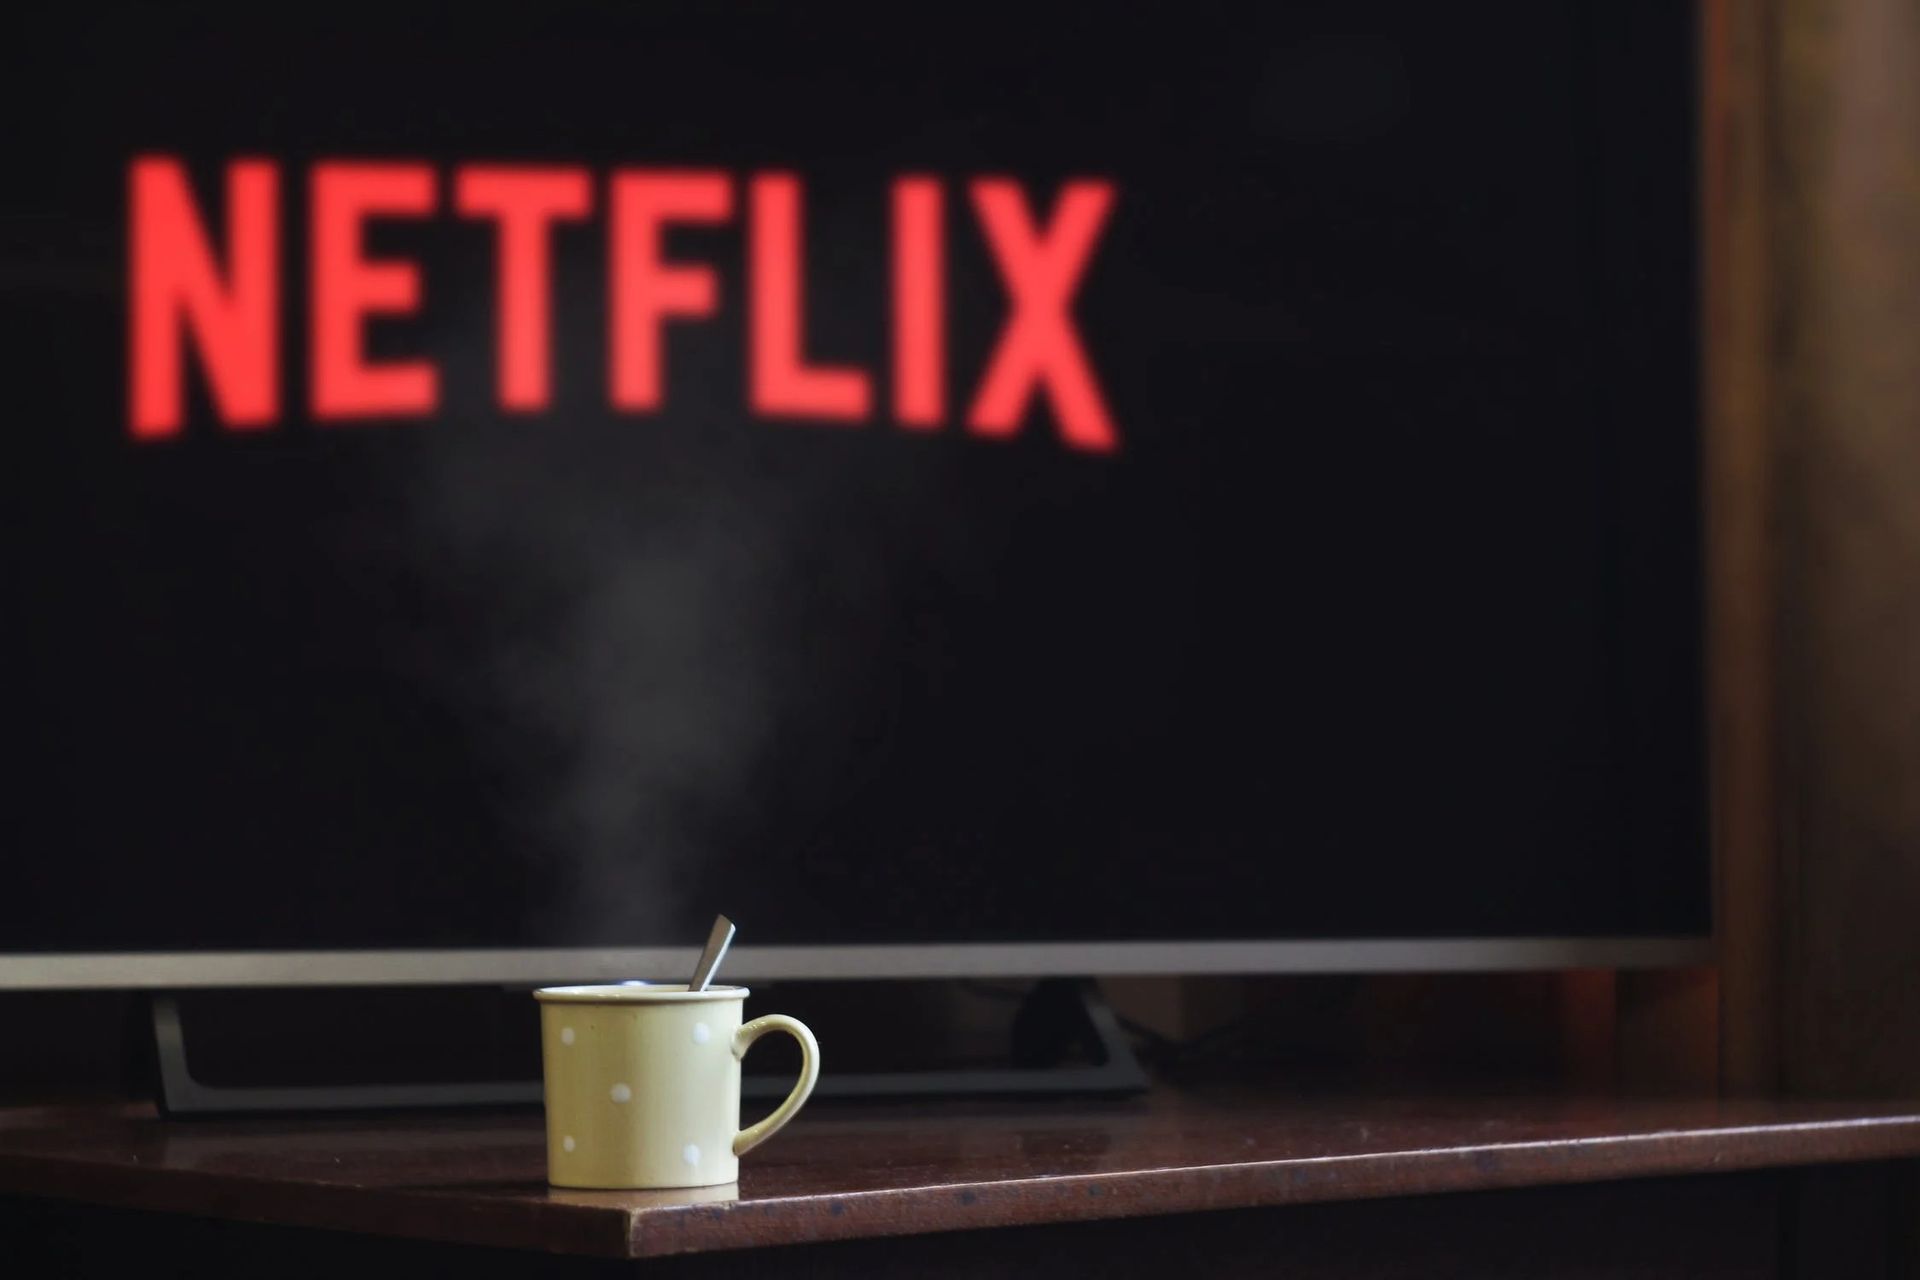 The popular streaming platform Netflix will add live streams to its service soon. Netflix might be a key platform for stand-up artists and other live shows soon